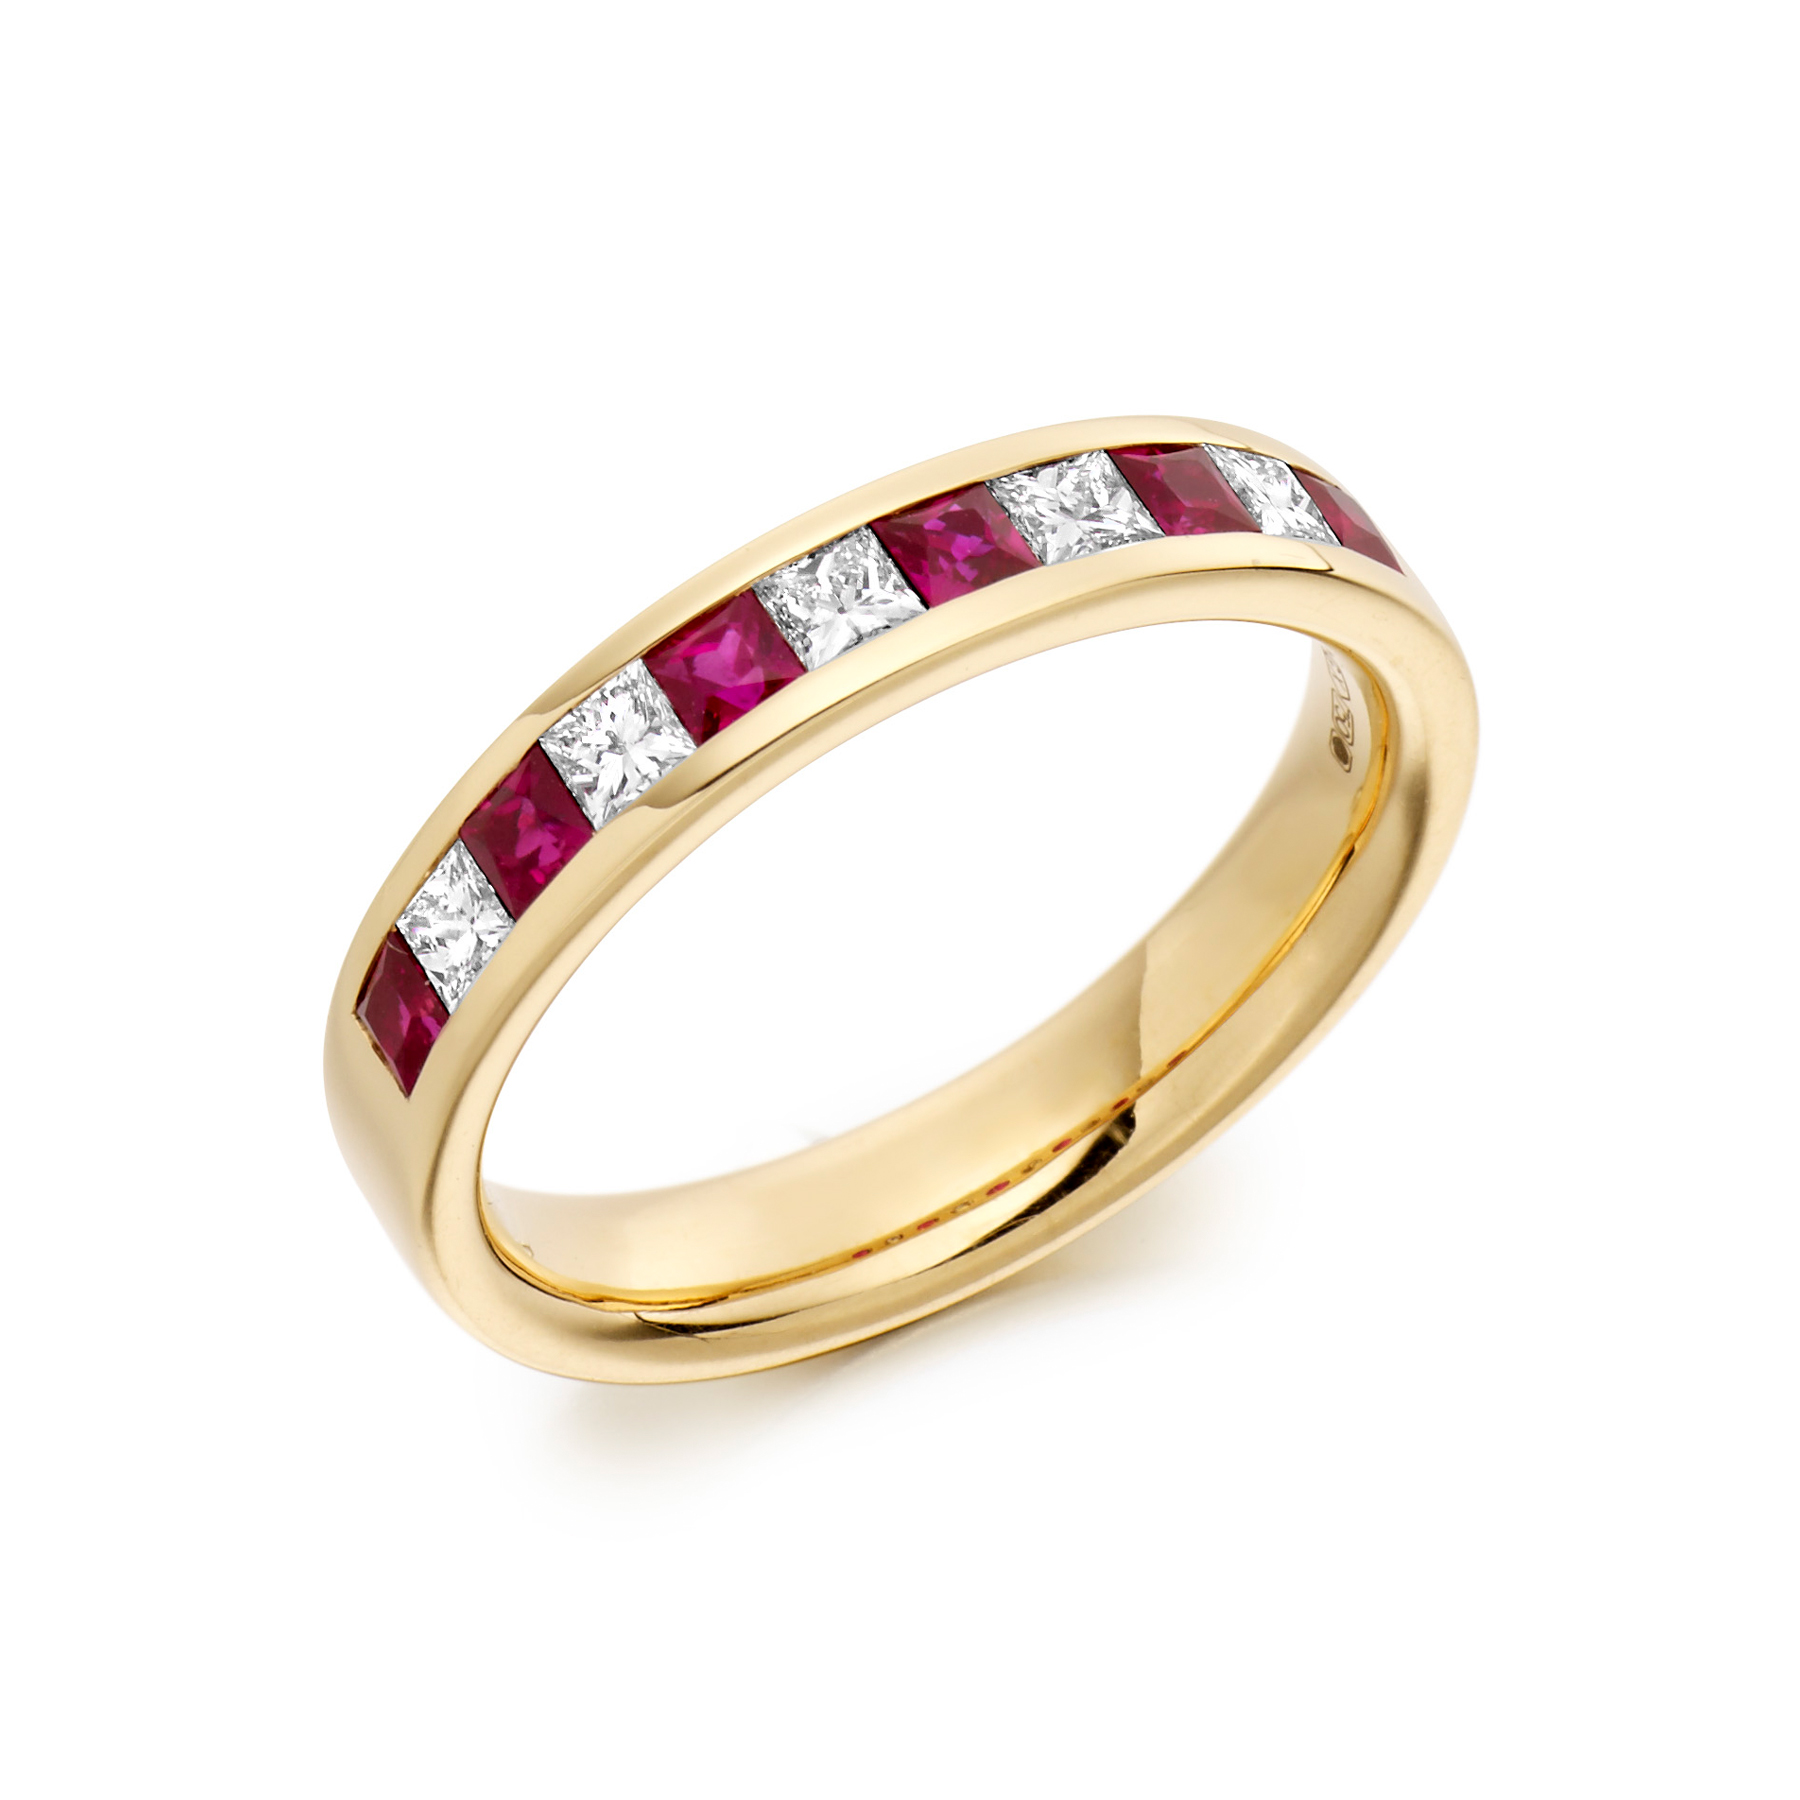 Square cut diamond and ruby half eternity ring